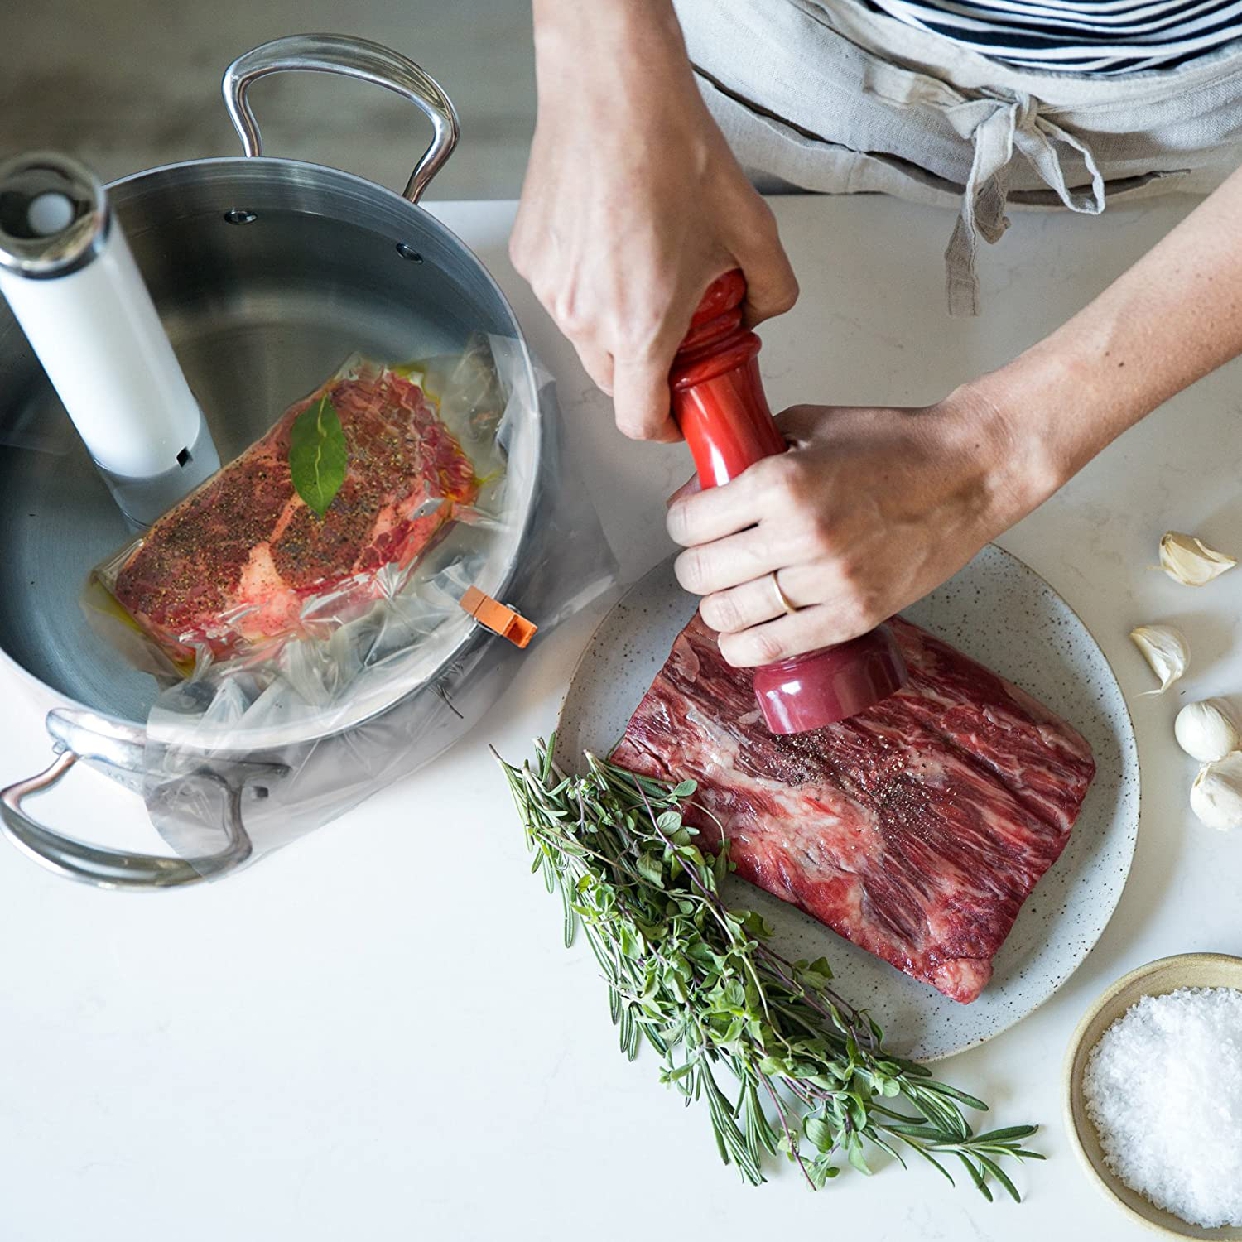 ChefSteps(シェフステップス) Joule Sous Vide CS10001の商品画像サムネ4 